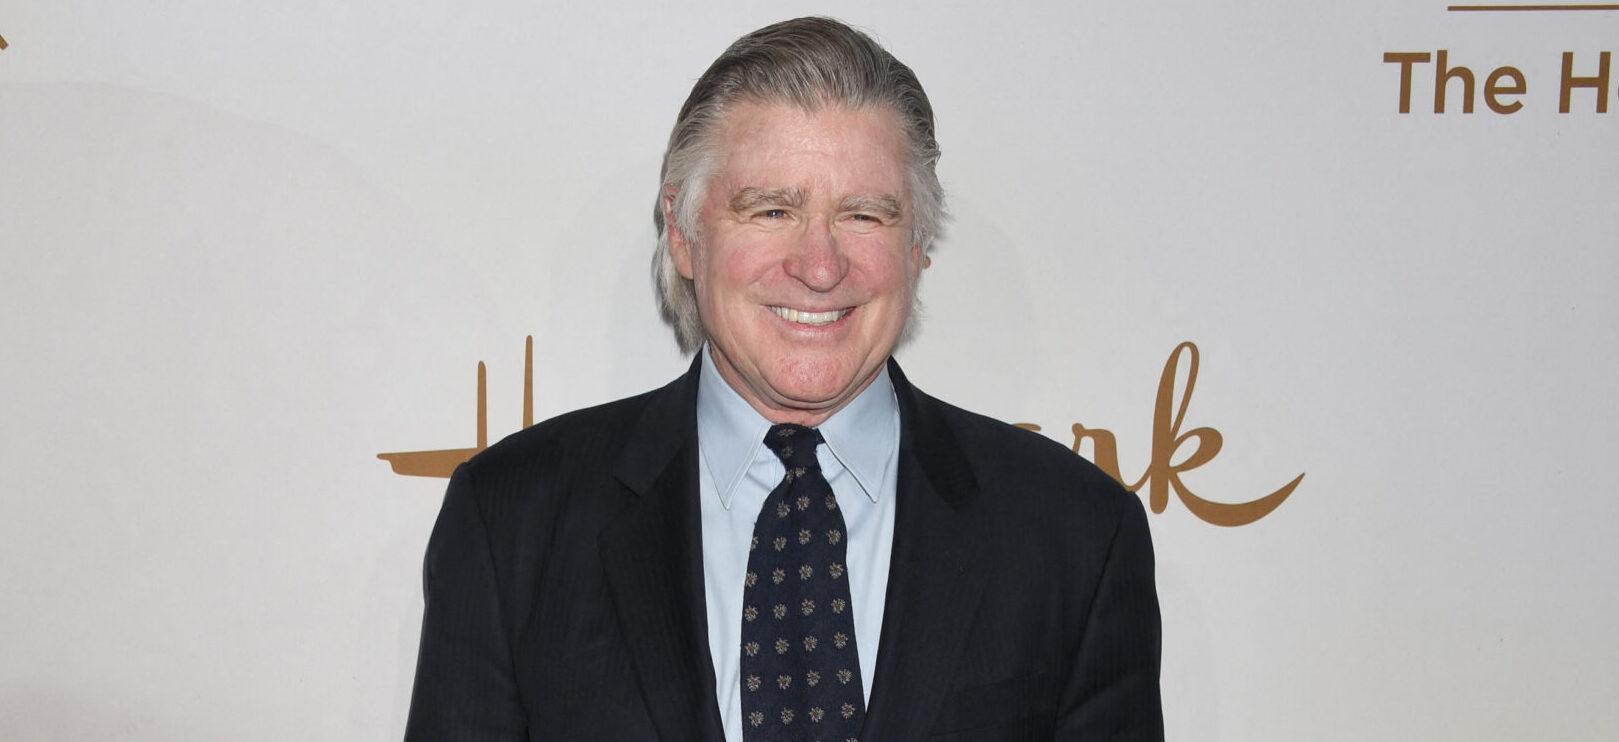 Treat Williams cause of death revealed